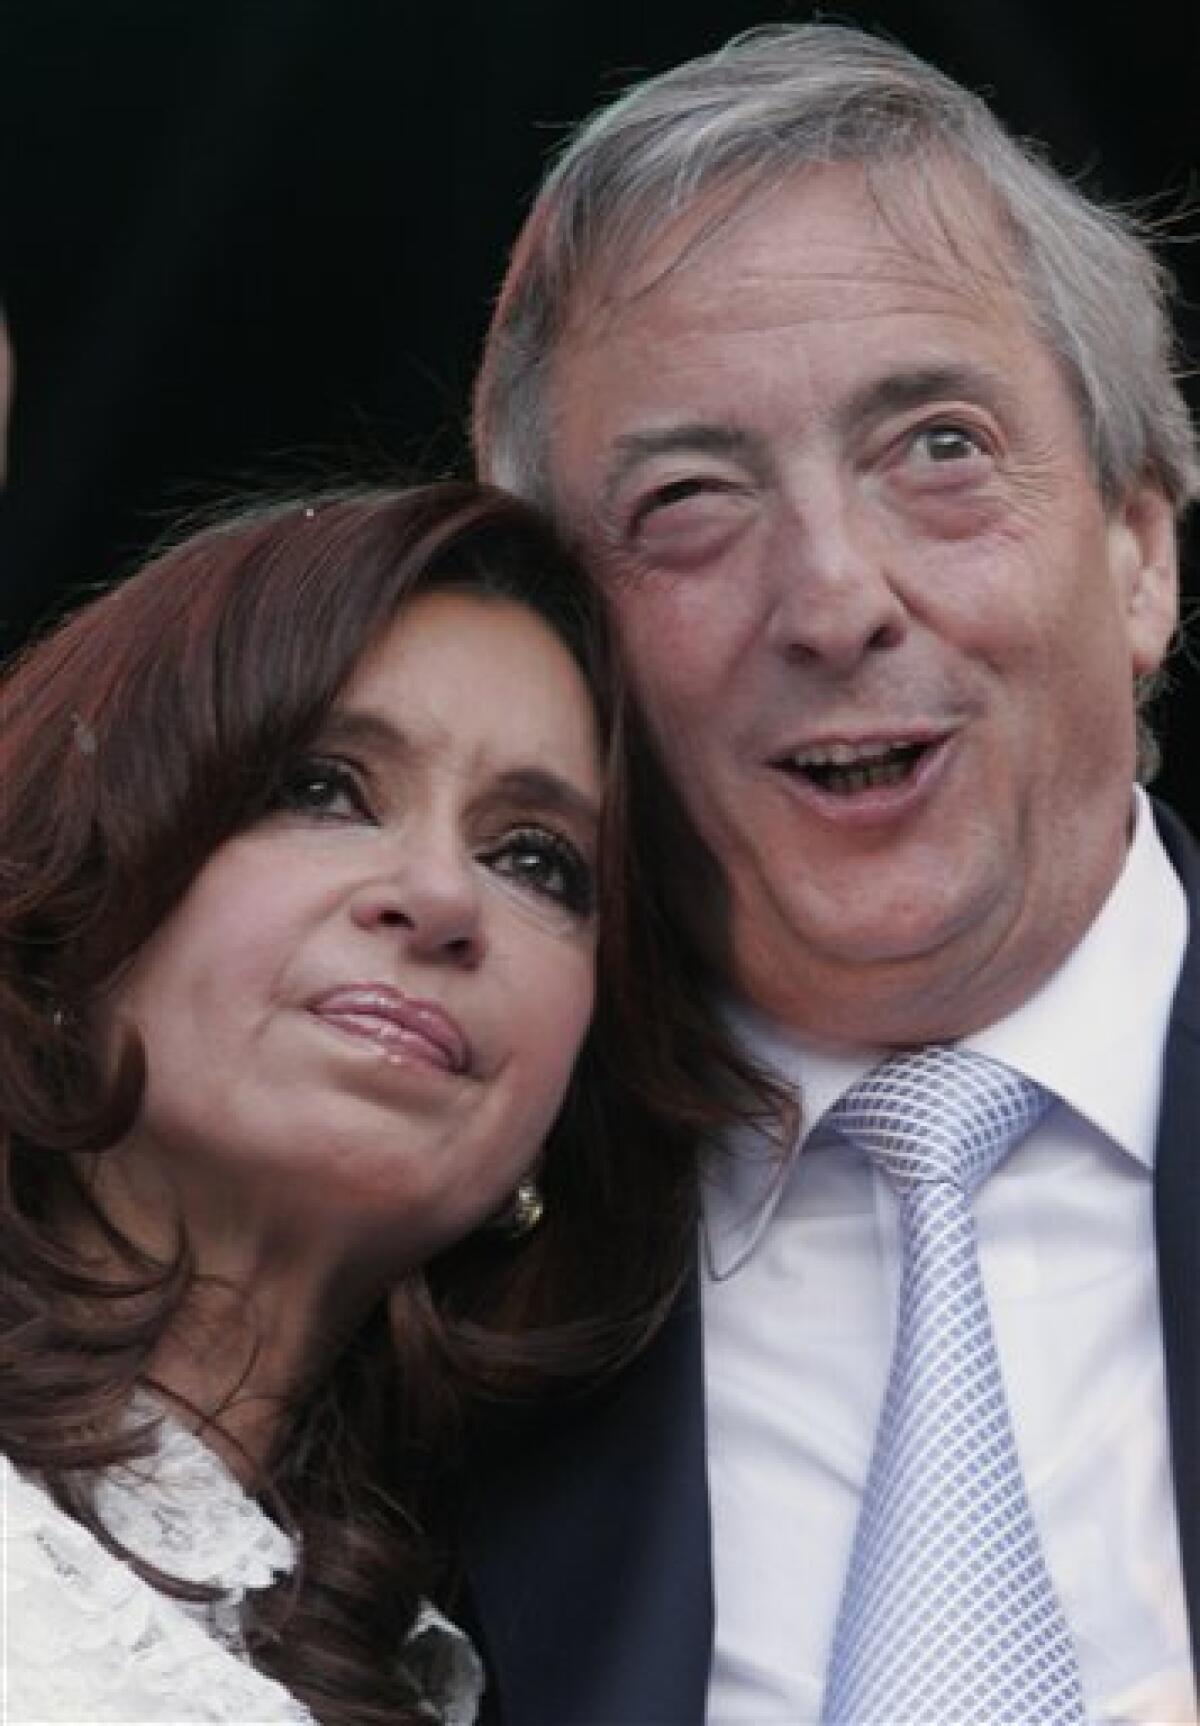 FILE - In this Dec. 10, 2007 file photo, Argentina's departing president Nestor Kirchner, right, embraces his wife, Argentina's new president Cristina Fernandez, during a music festival in front of the presidential palace in Buenos Aires, Argentina. According to state television in Argentina, Nestor Kirchner died on Wednesday Oct. 27, 2010 of a heart attack at age 60. (AP Photo/Jorge Saenz, File)